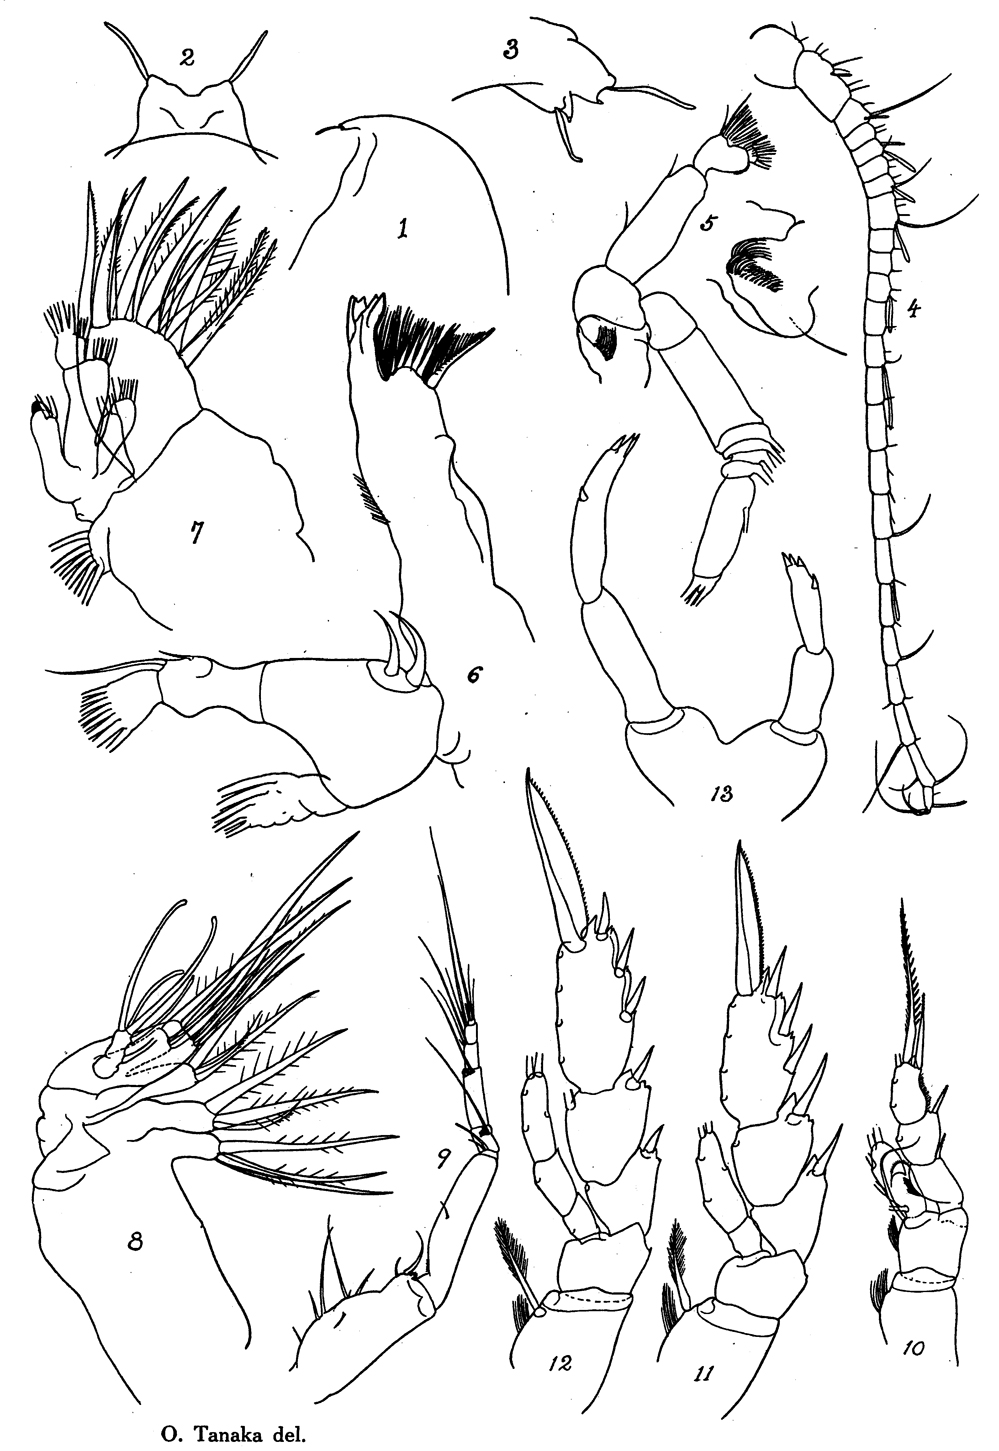 Species Undinella frontalis - Plate 5 of morphological figures